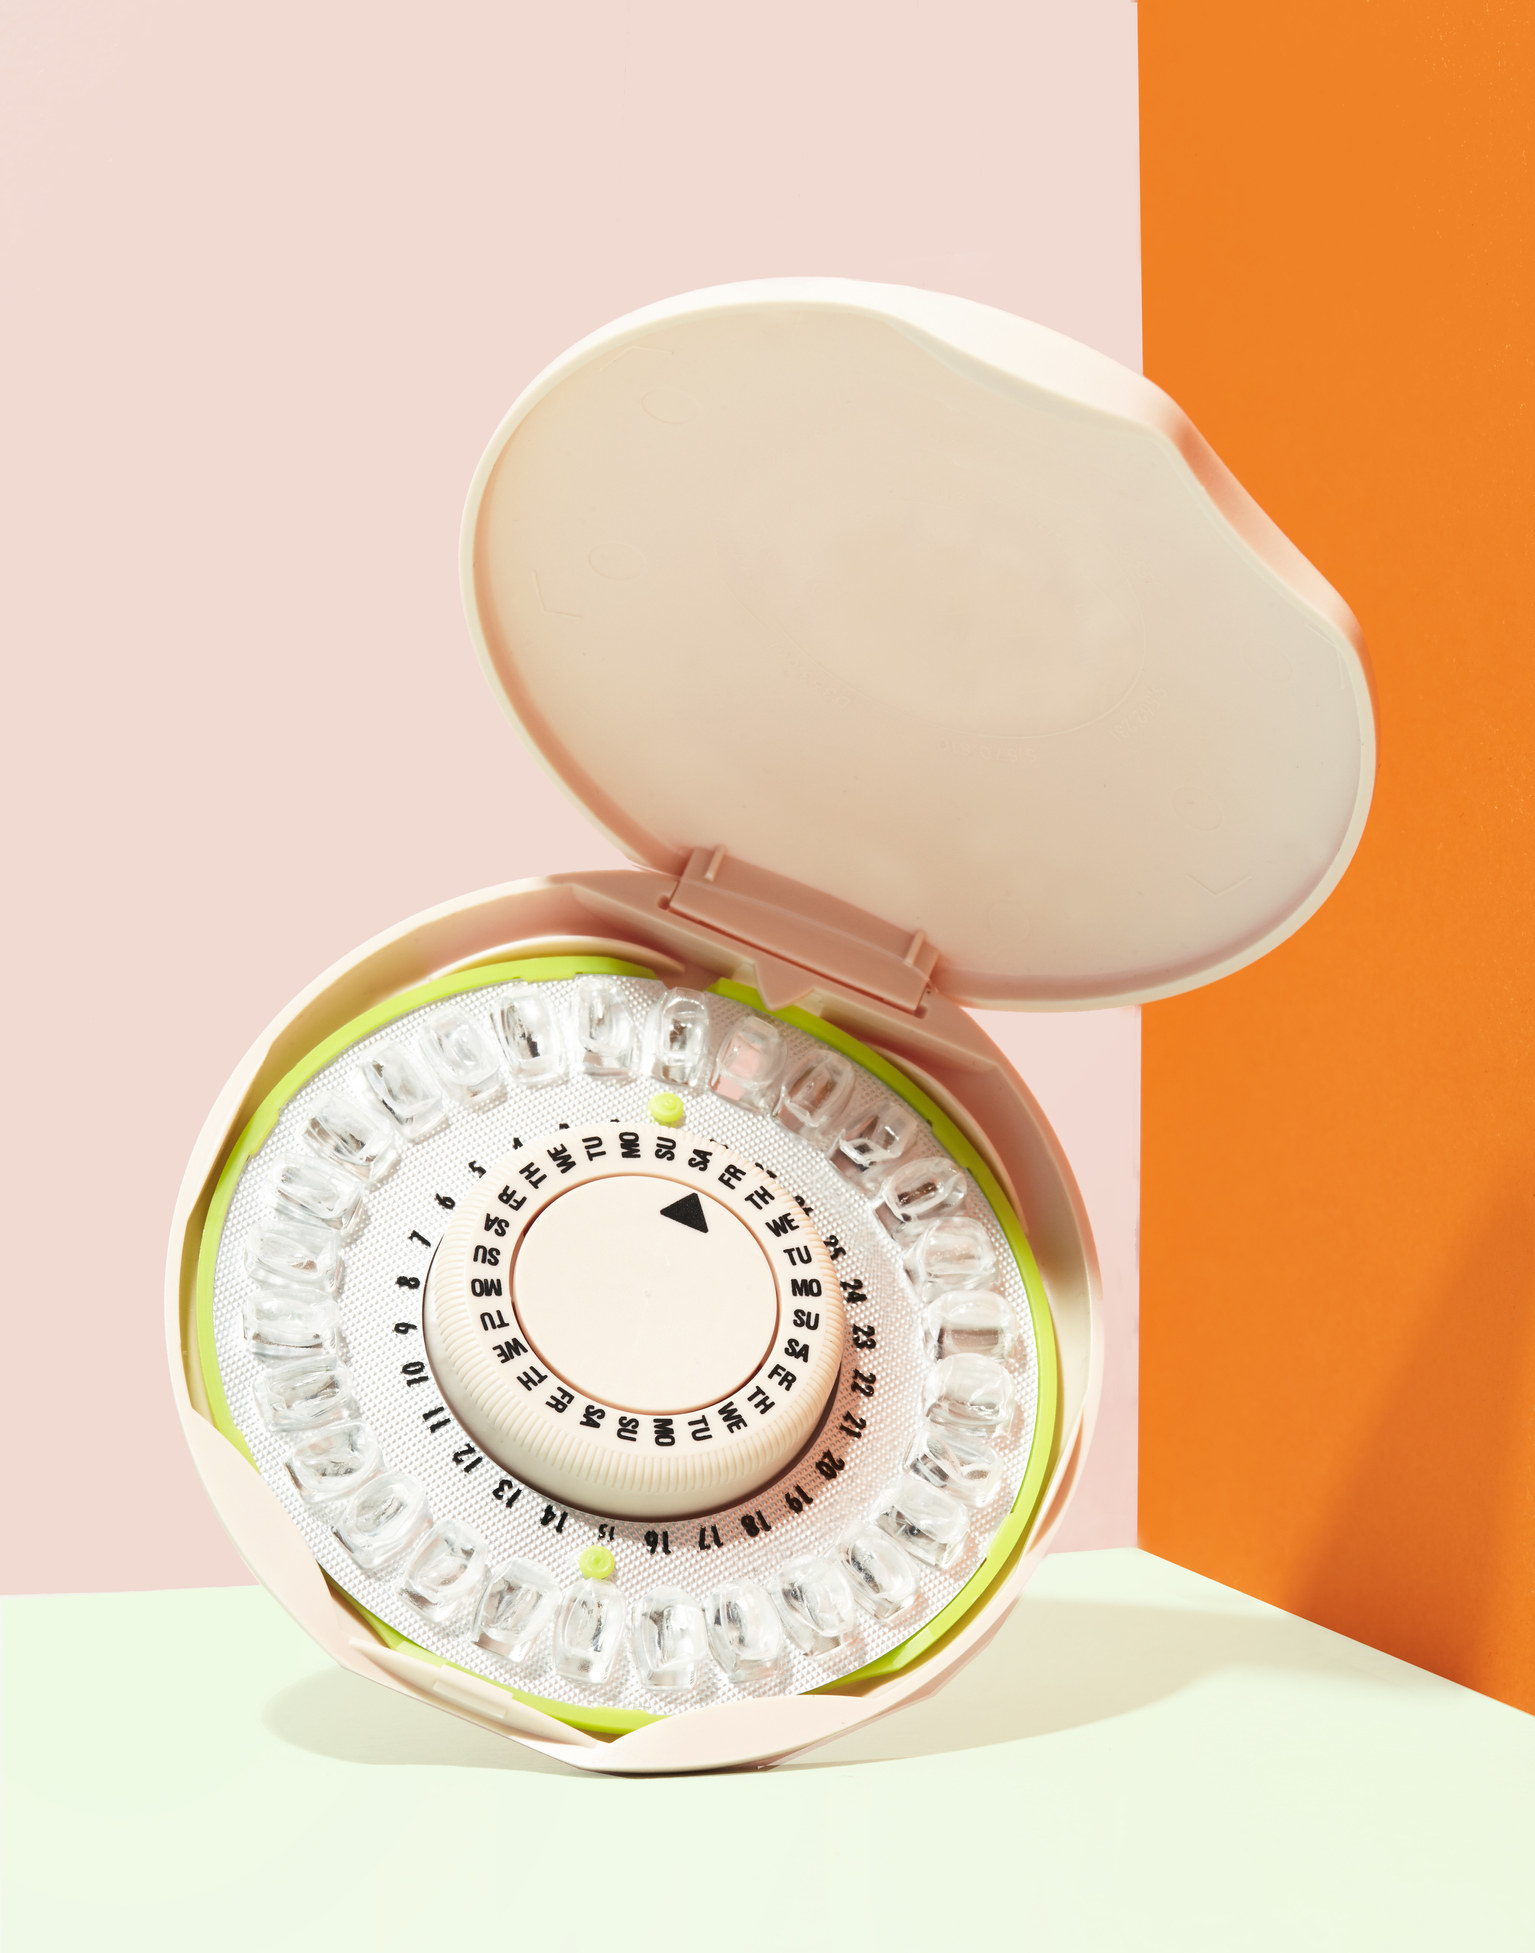 A stock image of a birth control pack